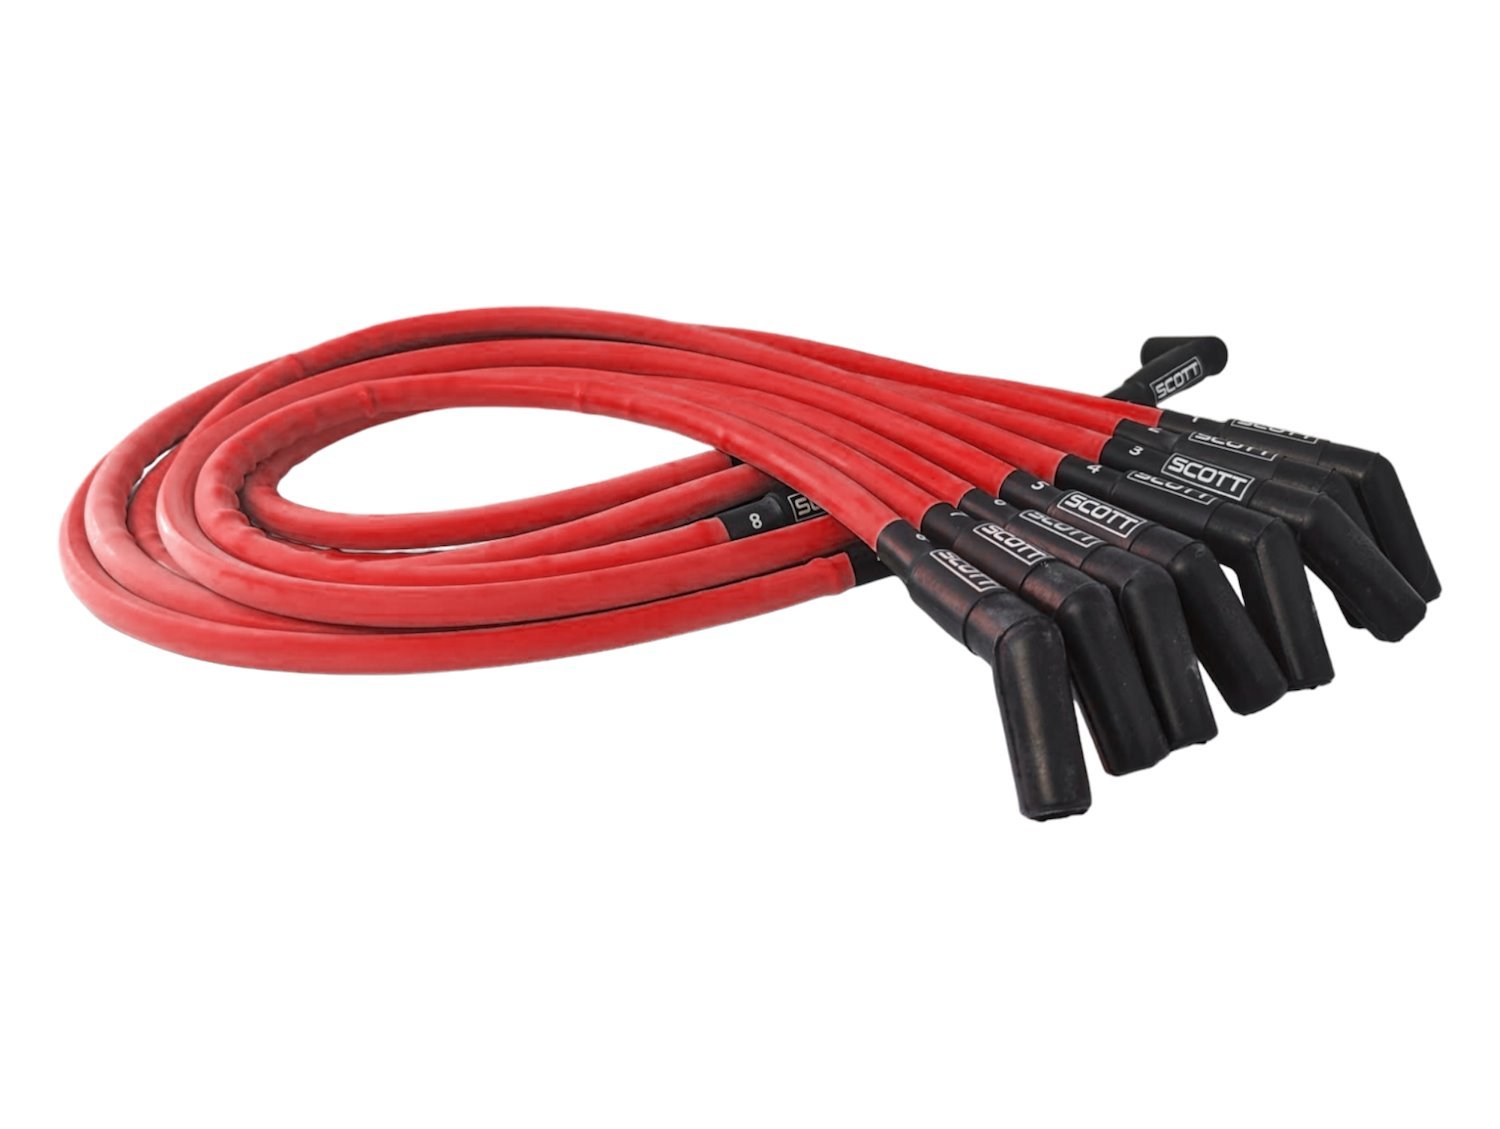 SPW-CH-415-2 High-Performance Silicone-Sleeved Spark Plug Wire Set for Big Block Chevy, Over Valve Cover [Red]